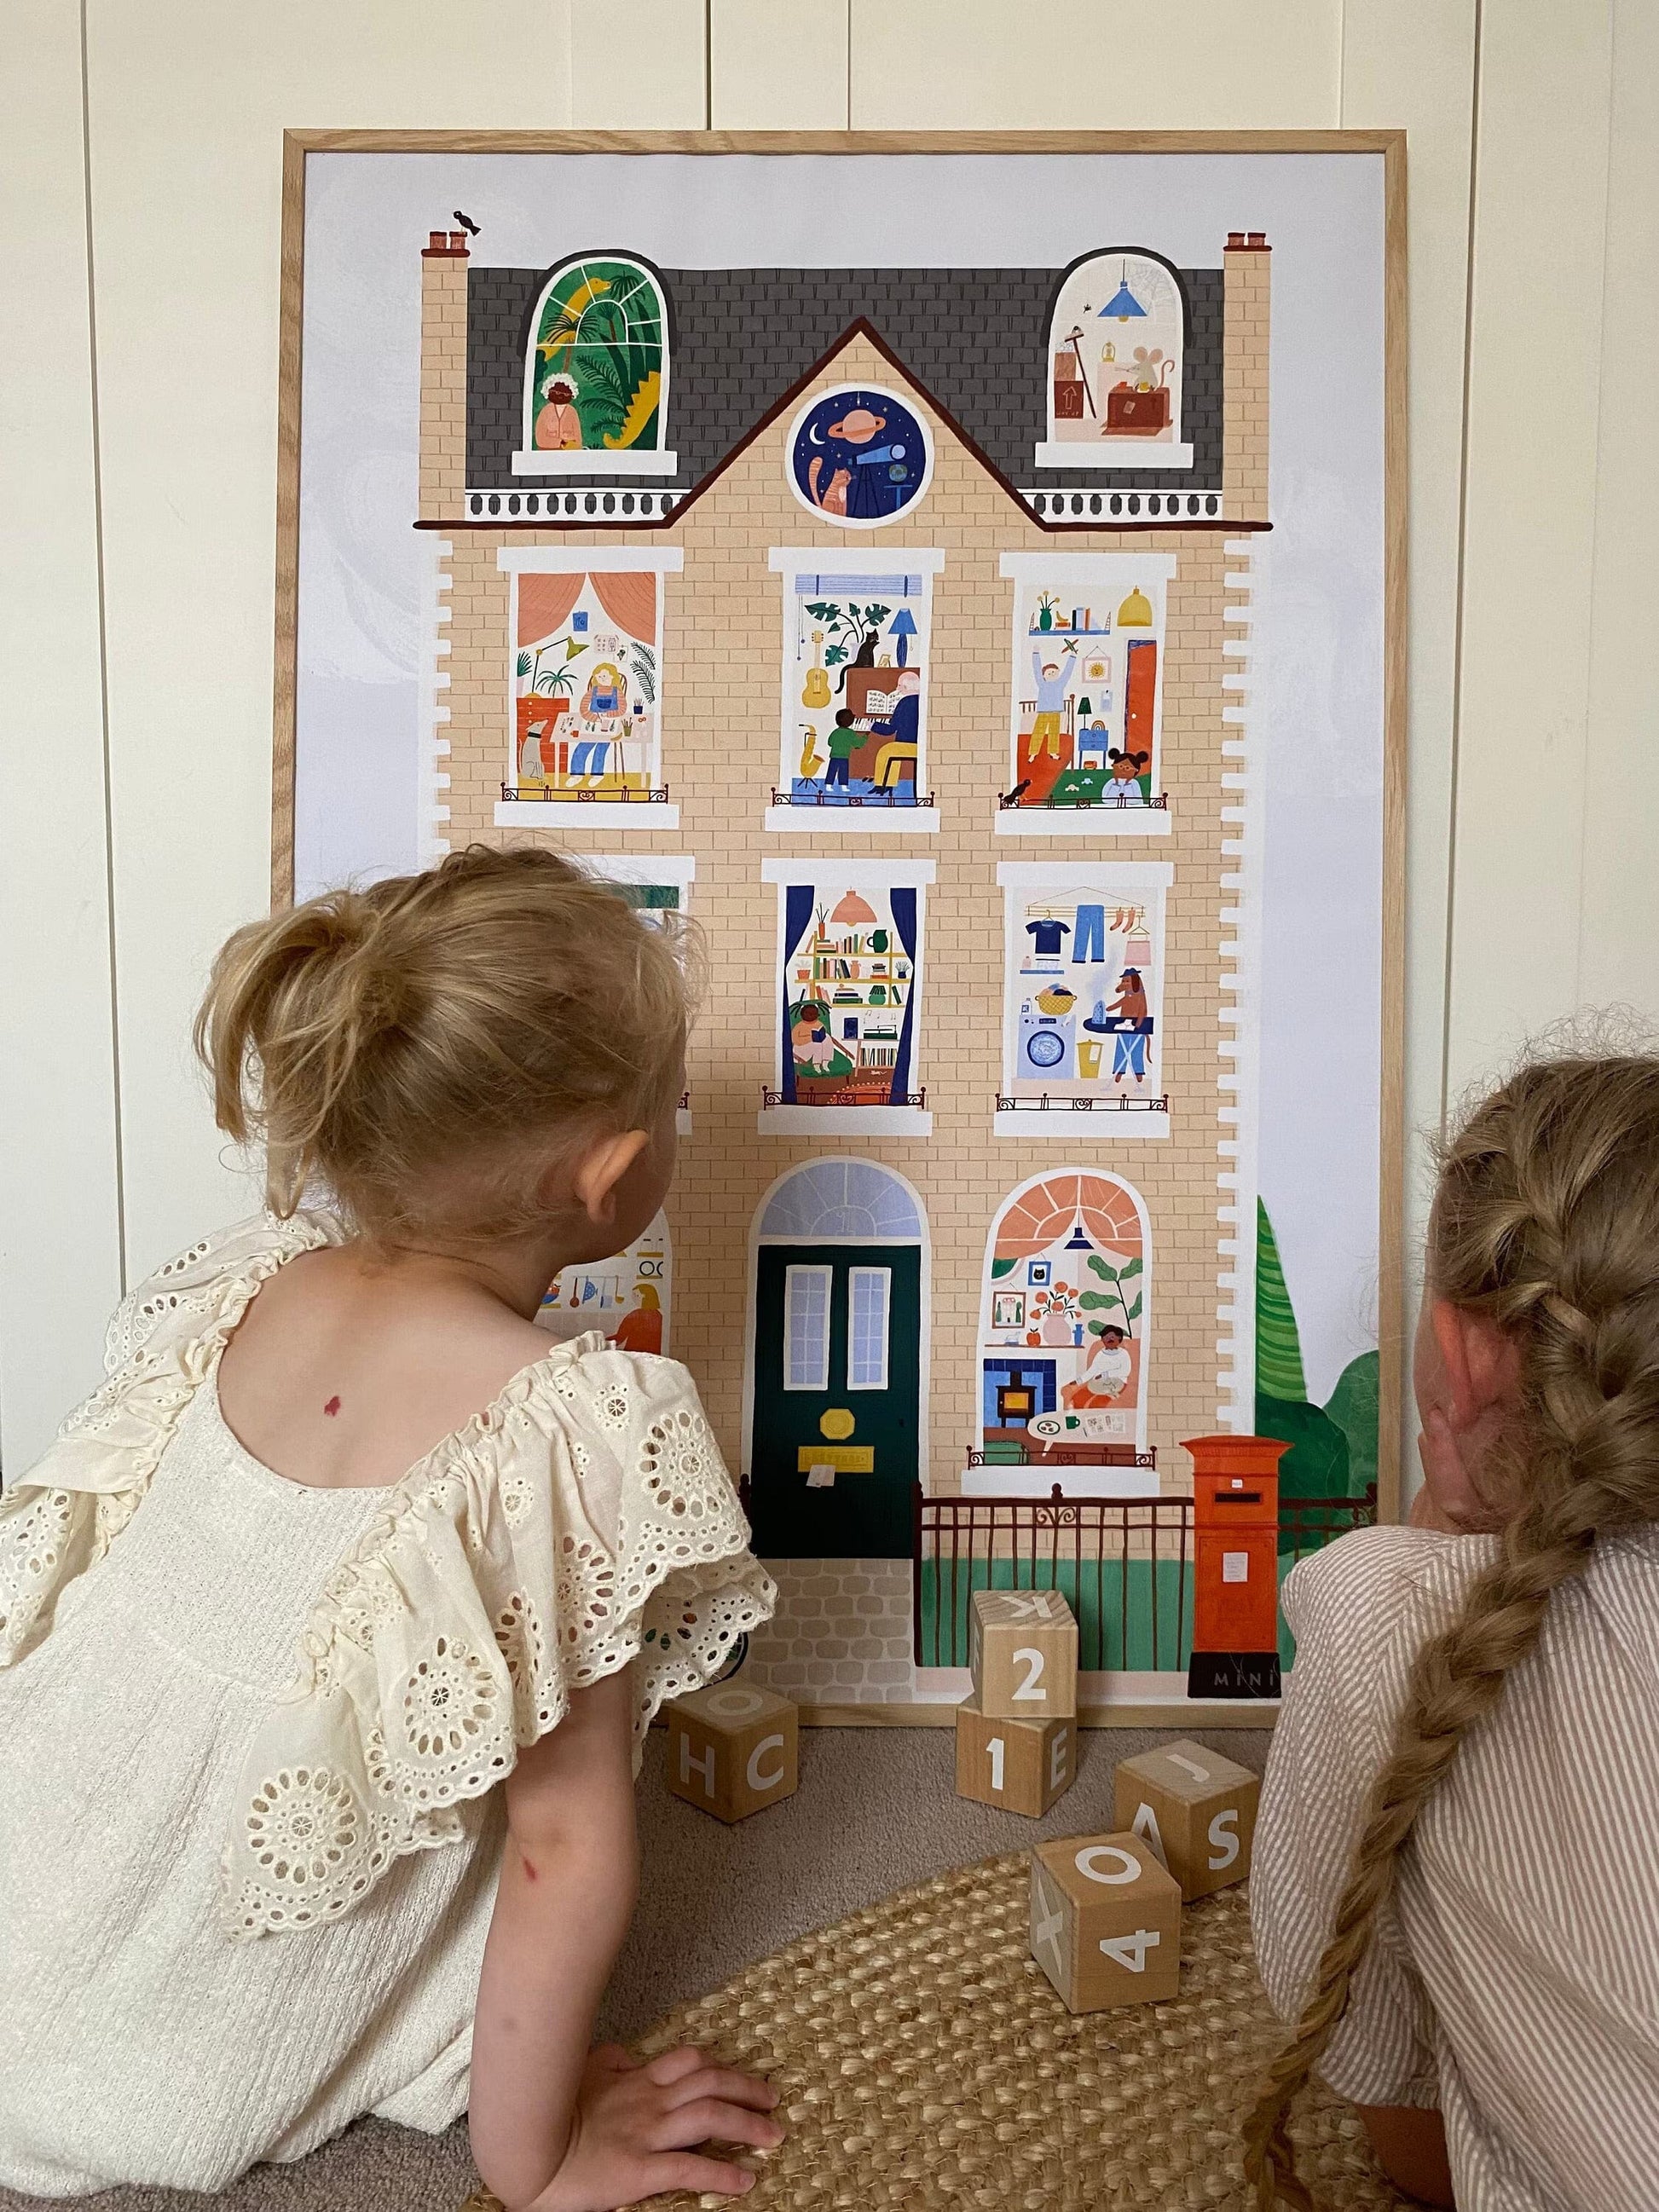 2 girls sitting on a jute ruge with alphabet blocks between them looking at our Hourt art print. Our House Art Print shows a large brick town house with 11 windows each showing a different scene, from an ironing dog to a dinosaur in the attic to the artist herself hard at work. Features a bike against a railing, a post box, traditional lamppost and hidden birds.